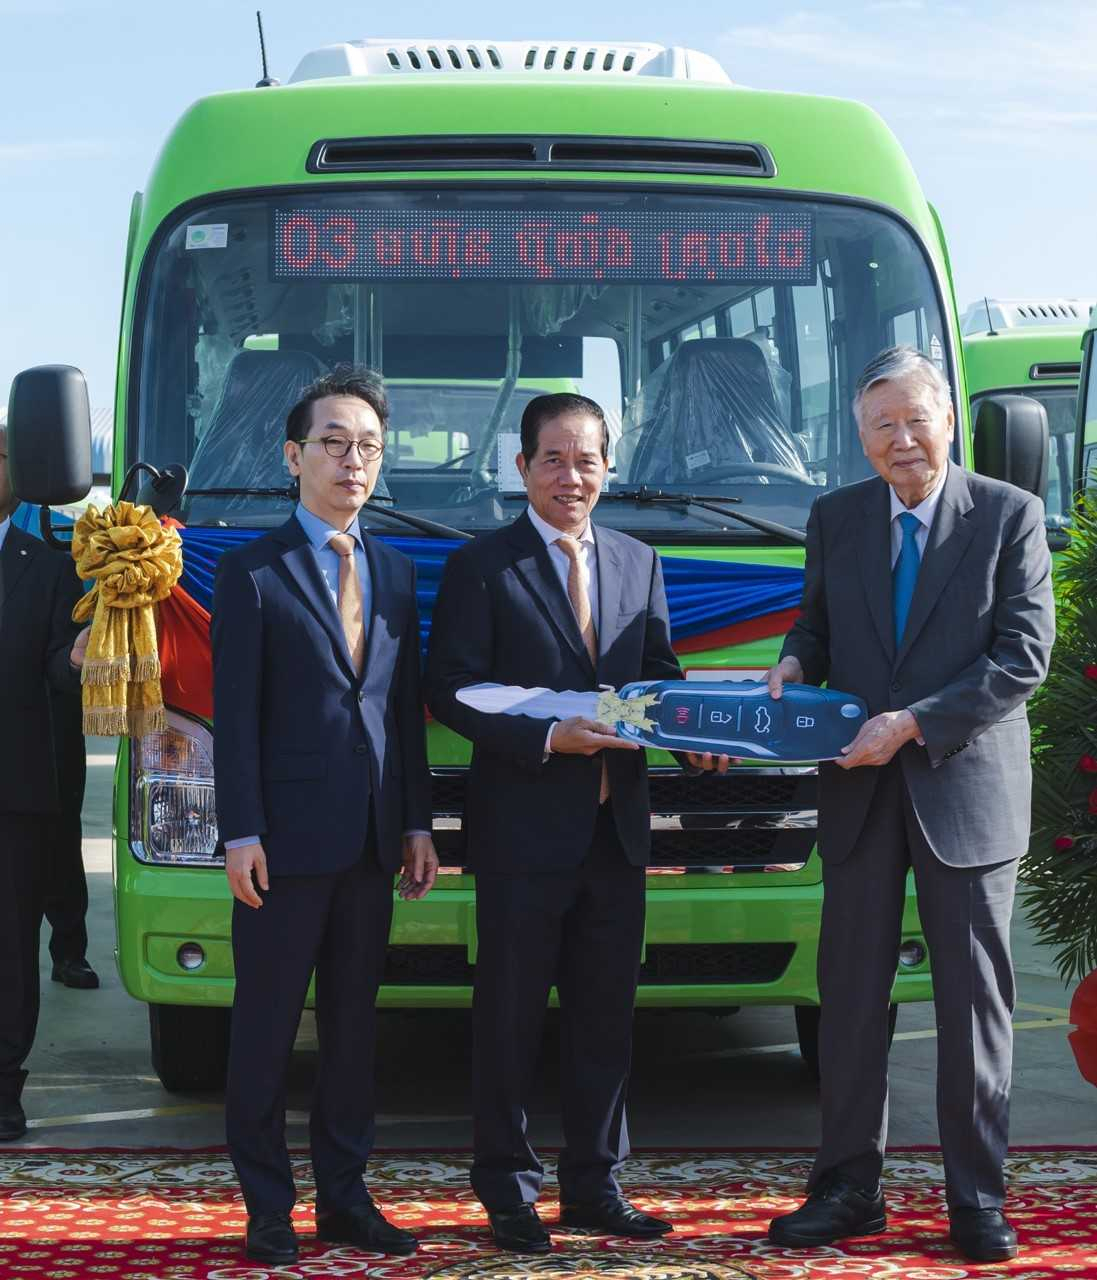 Booyoung Group founder and Chairman Lee Joong-keun (right) and Phnom Penh Municipal Gov. Khuong Sreng (center) pose for a photo after 200 buses were delivered to the Cambodian capital on Tuesday. (Booyoung Group)